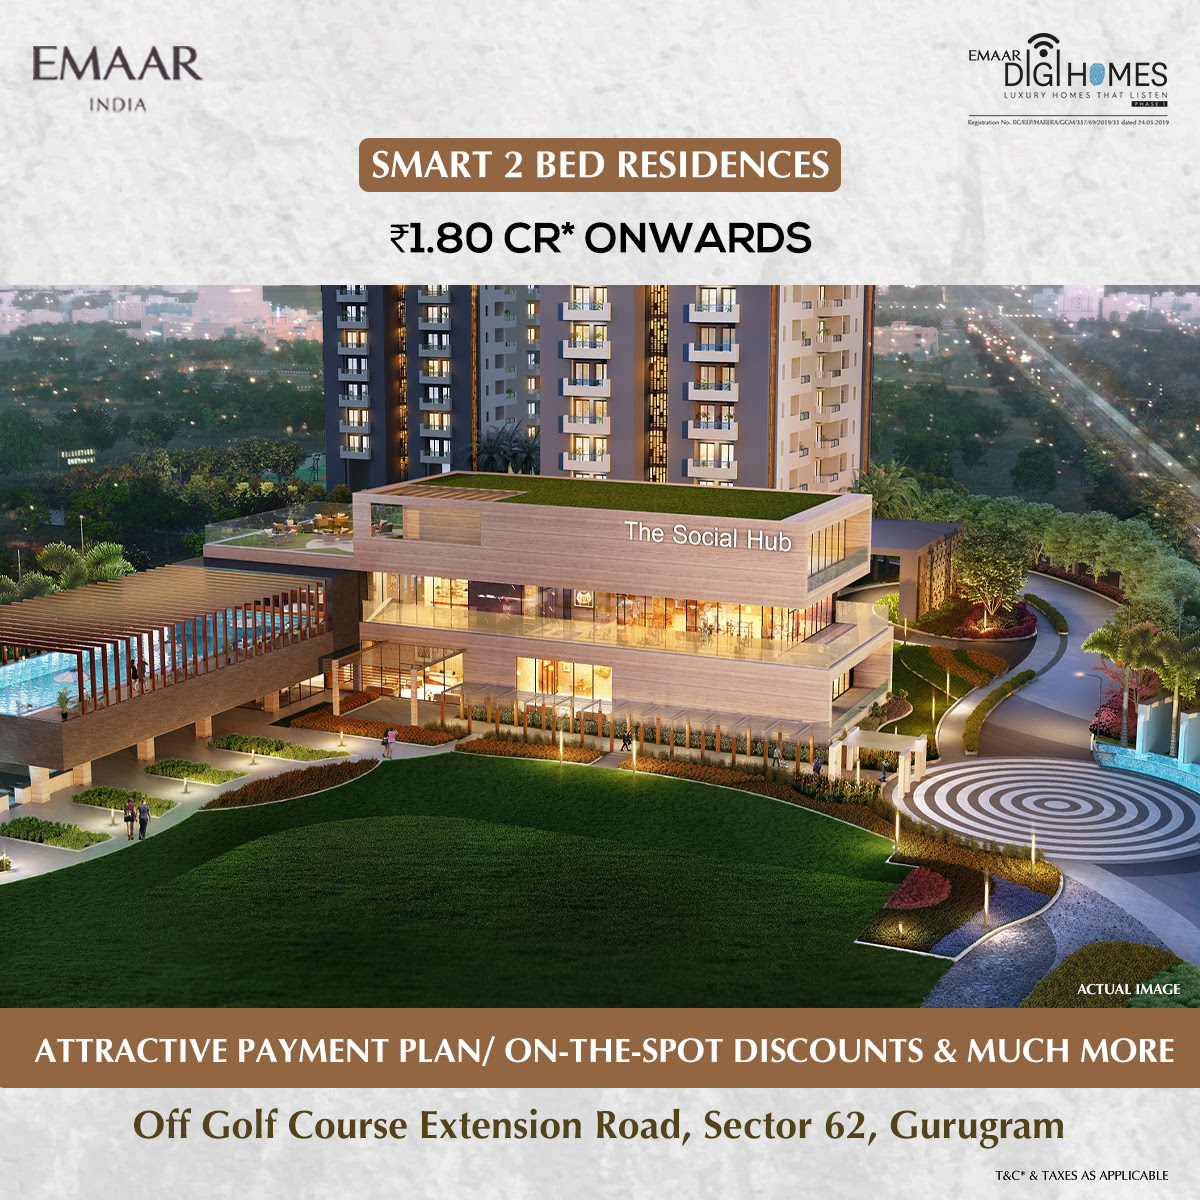 Superstructure ready special price on limited unit at Emaar Digi Homes in Sector 62, Gurgaon Update